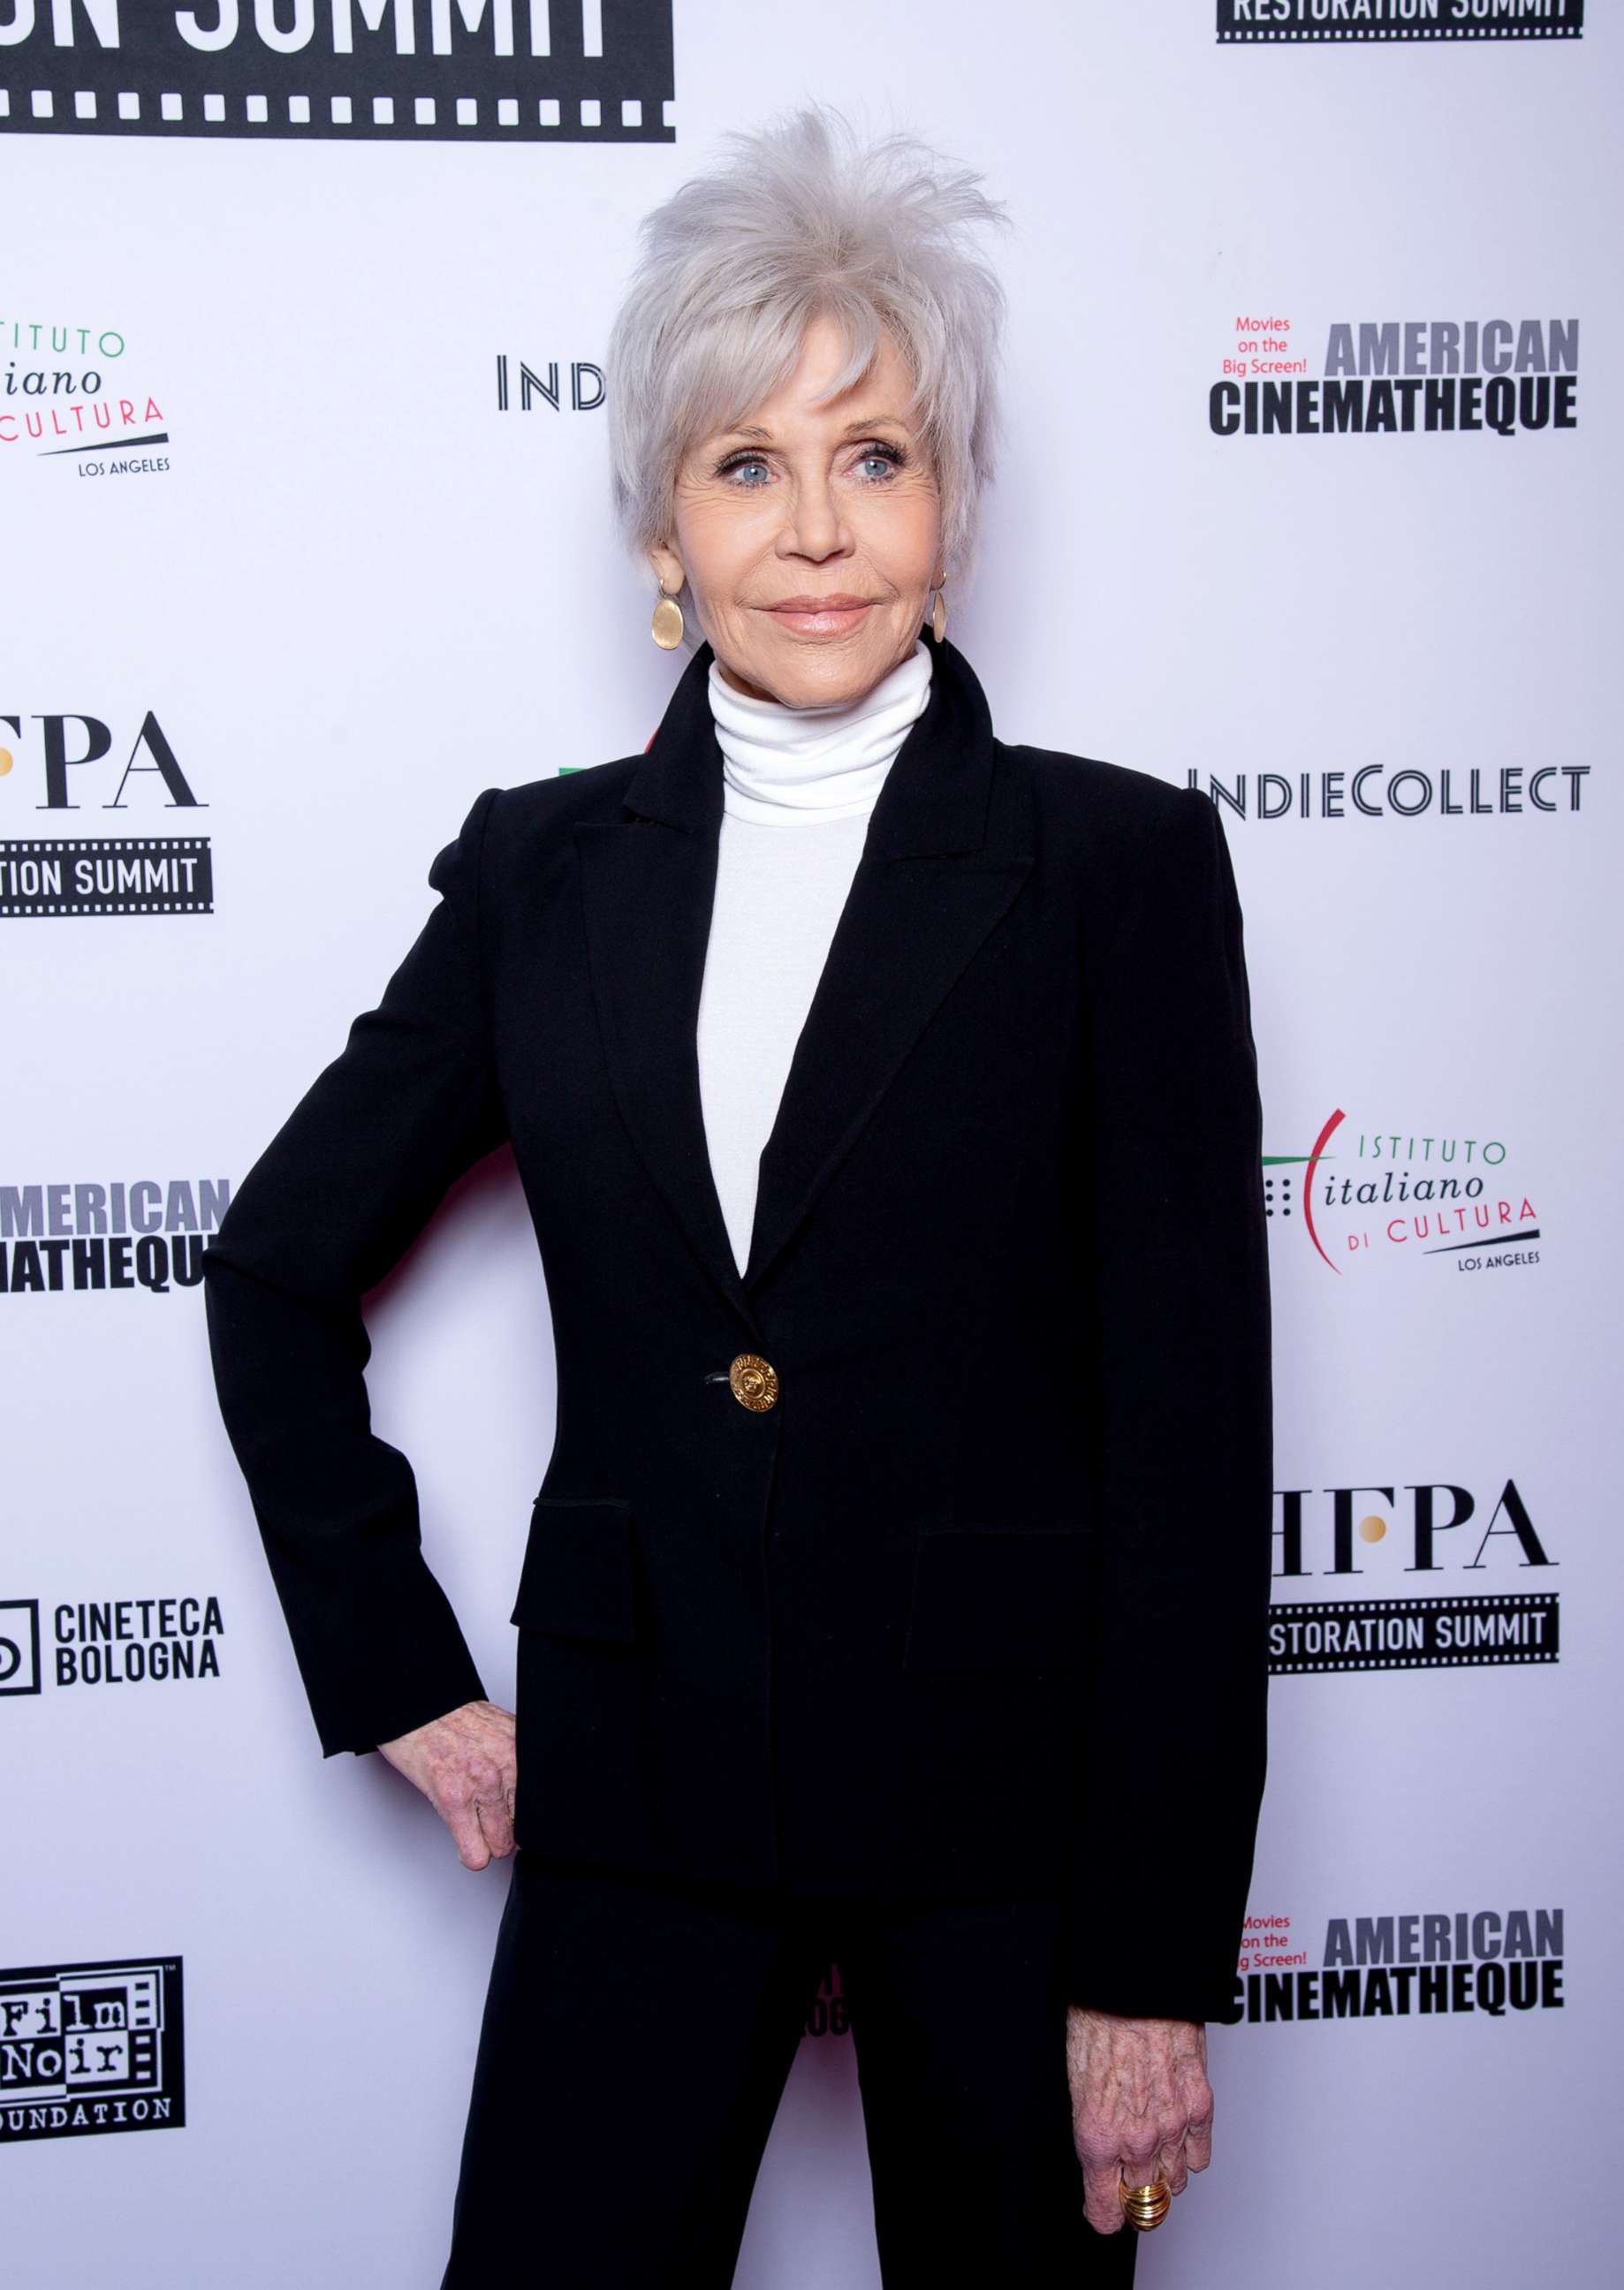 PHOTO: Jane Fonda attends the American Cinematheque's new 4K restoration world premiere of "F.T.A." at the Egyptian Theatre, Feb. 15, 2020, in Hollywood, Calif.